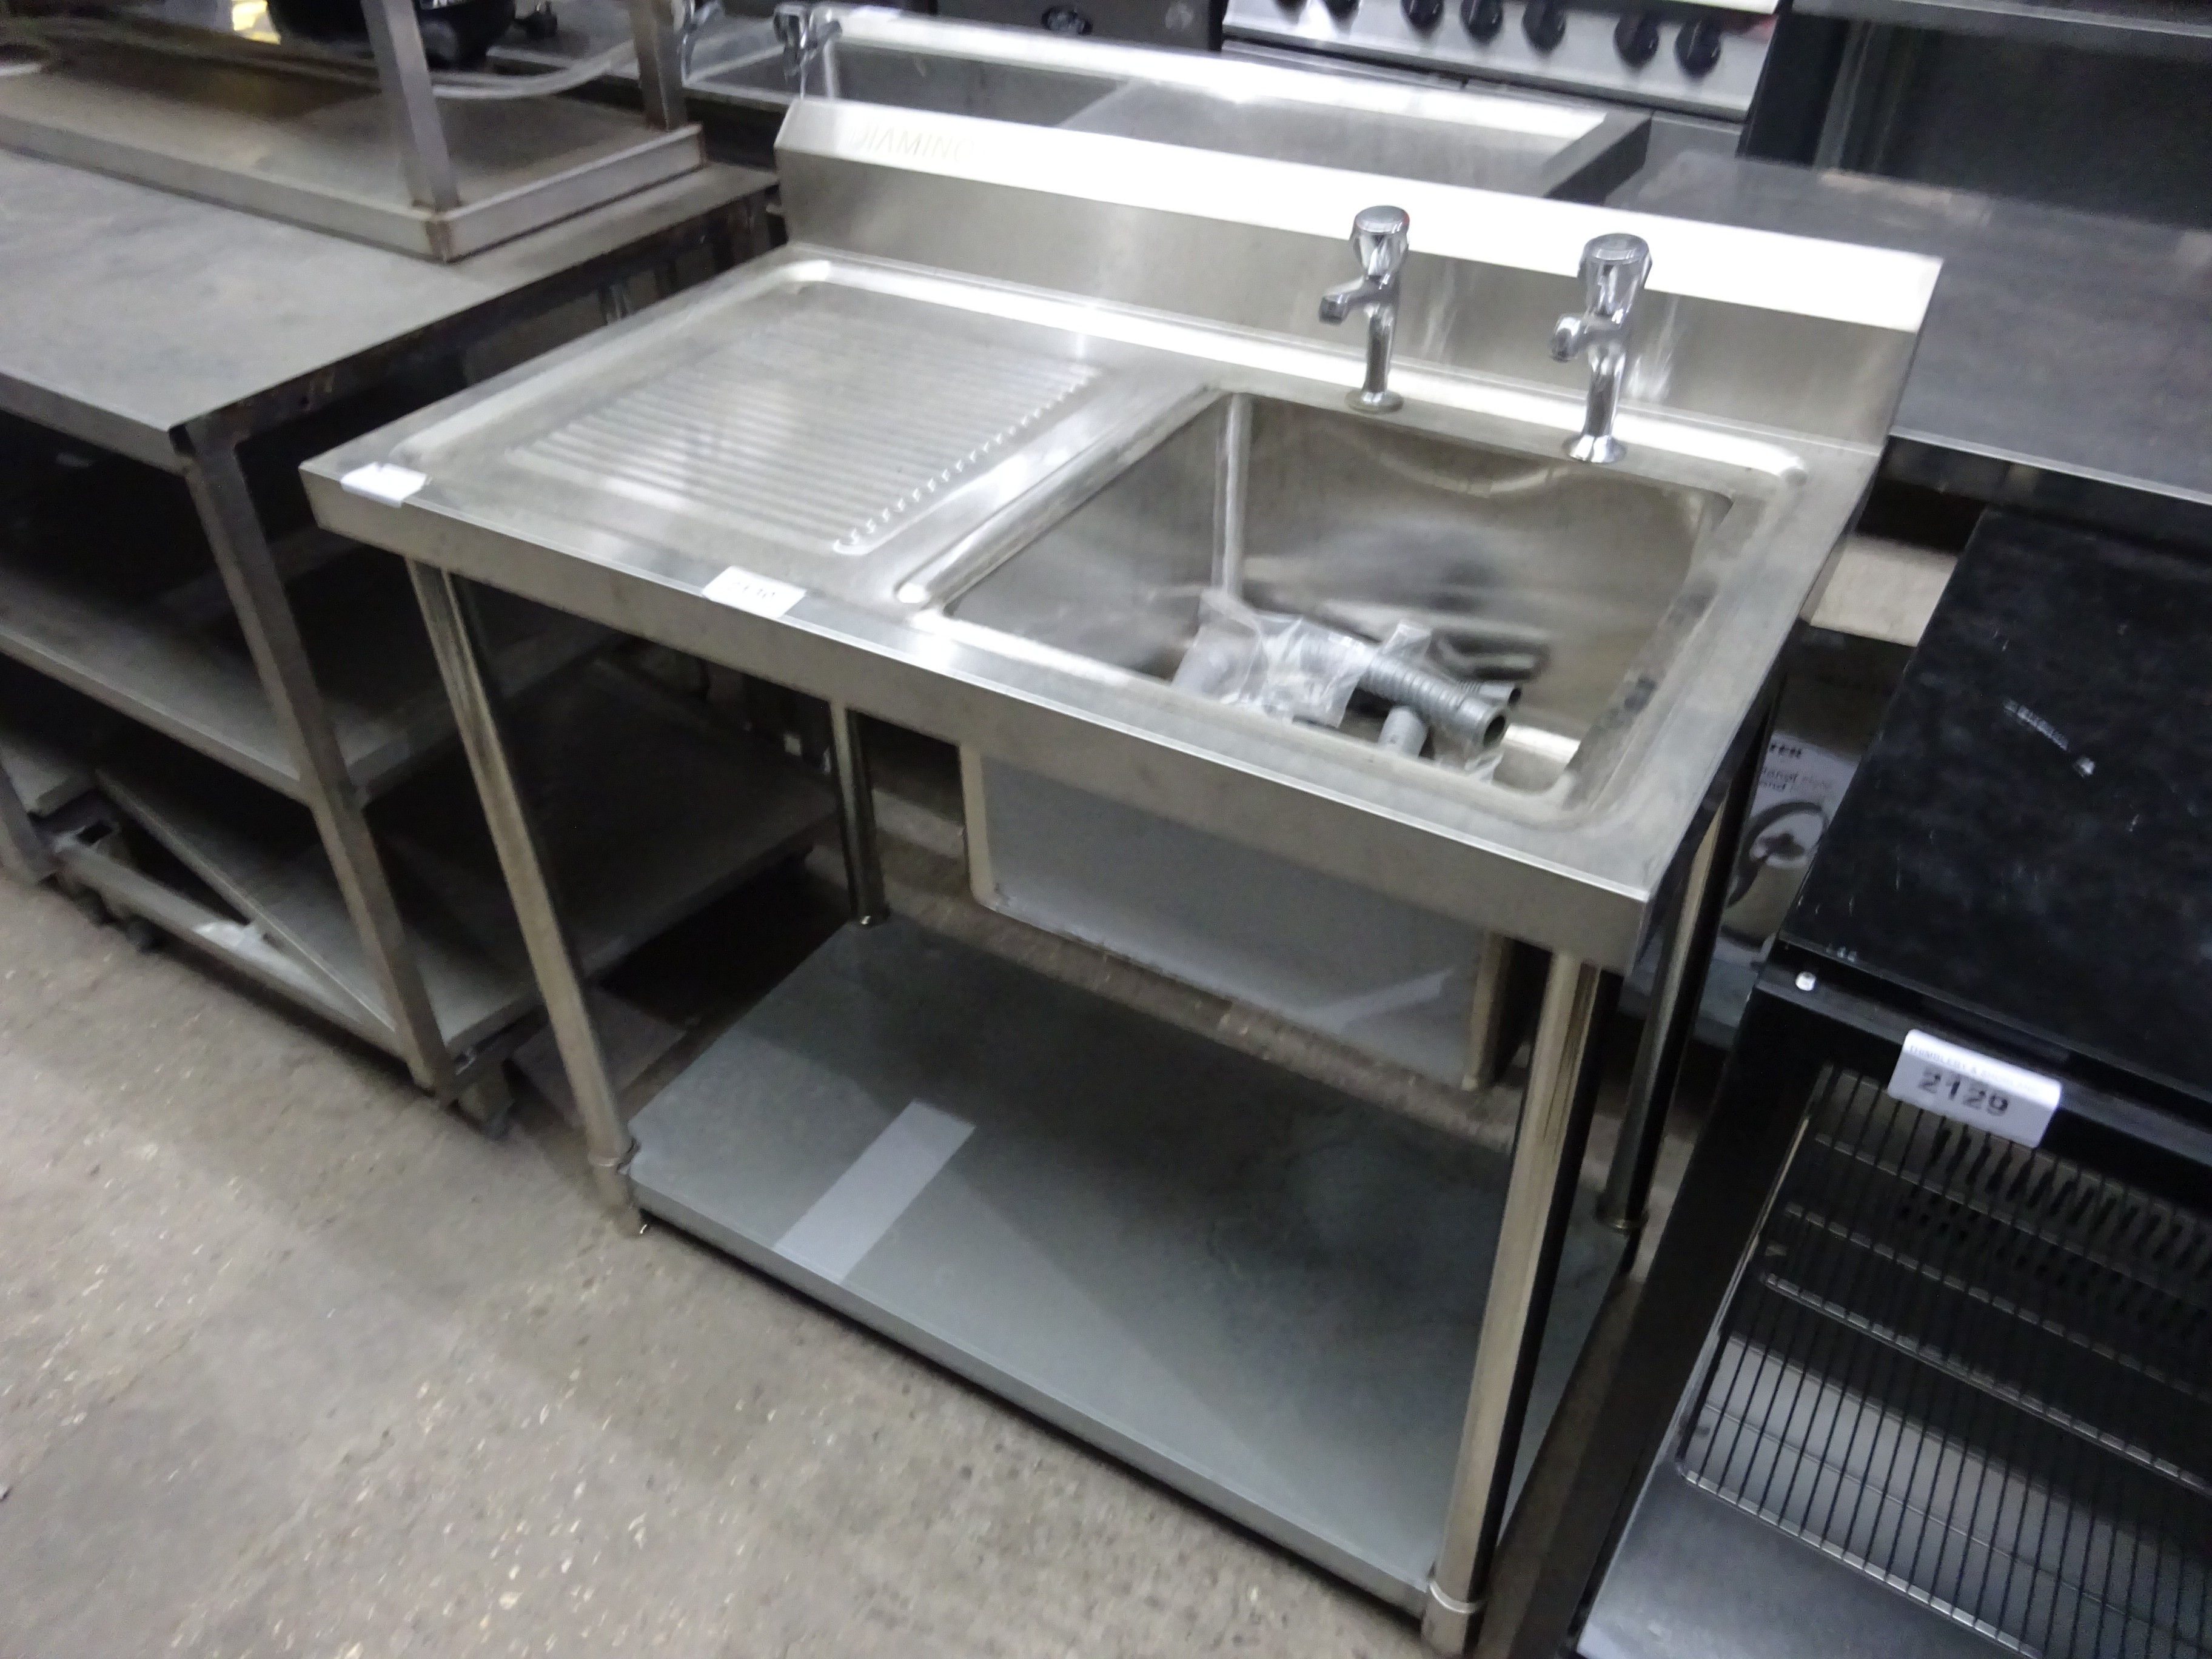 New Diaminox single bowl, single drainer sink with taps.